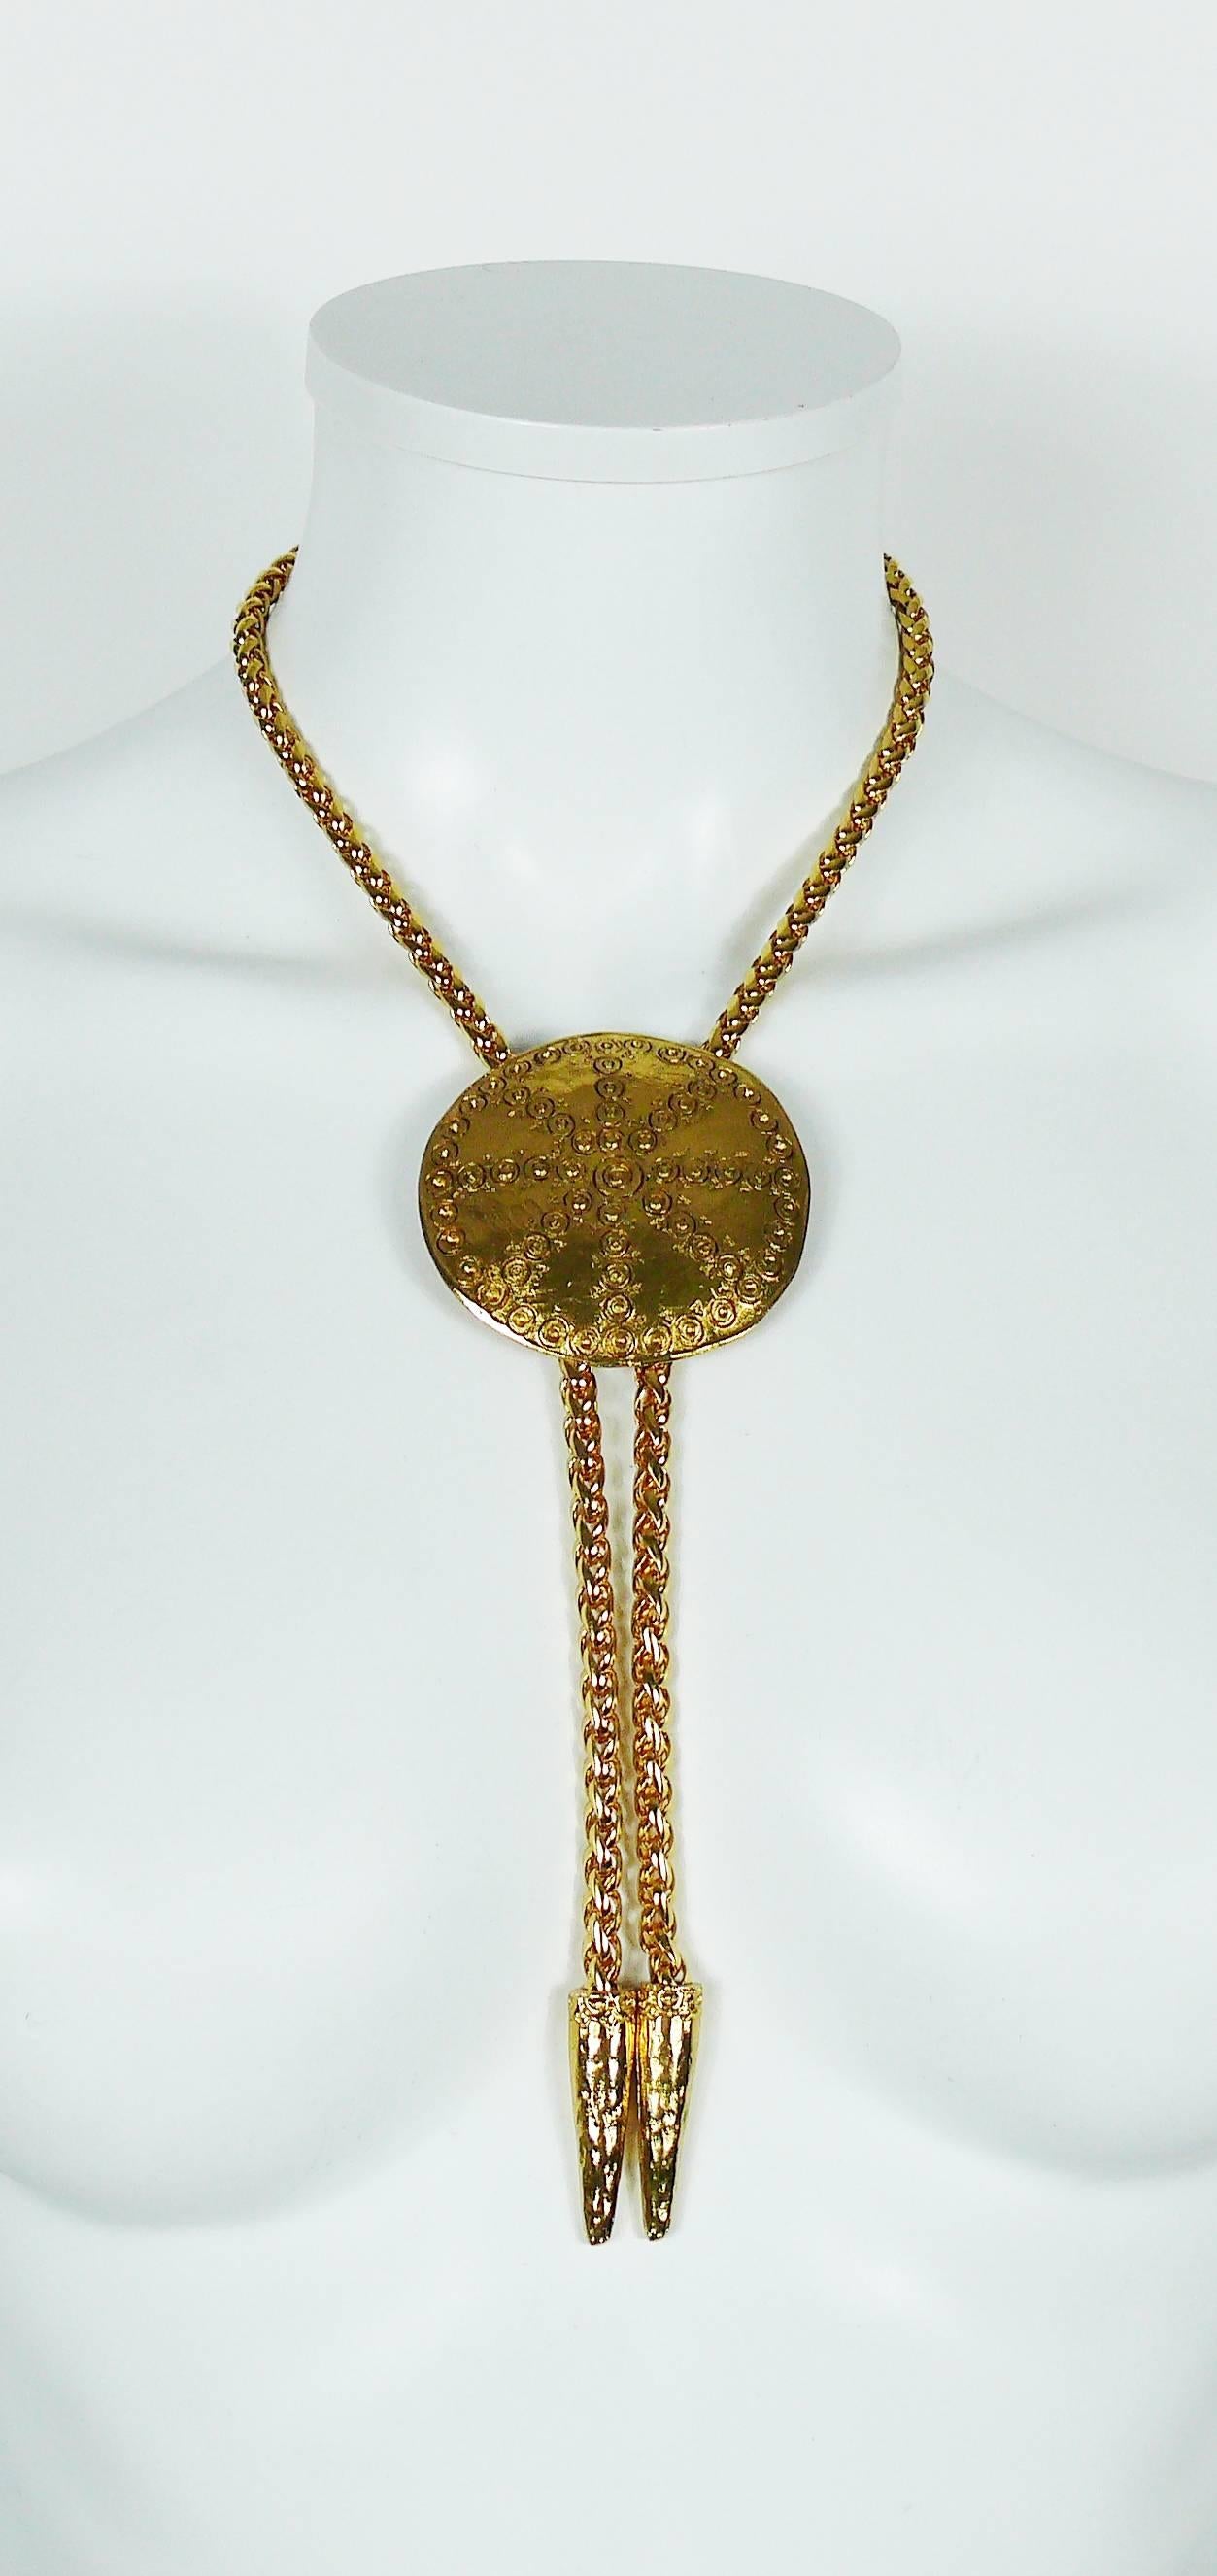 YVES SAINT LAURENT vintage gold toned lariat necklace featuring a large ethnic disc.

The height of the disc is adjustable.

Embossed YSL Made in France.

Indicative measurements : max. length worn (including tassels) approx. 33 cm (12.99 inches) /